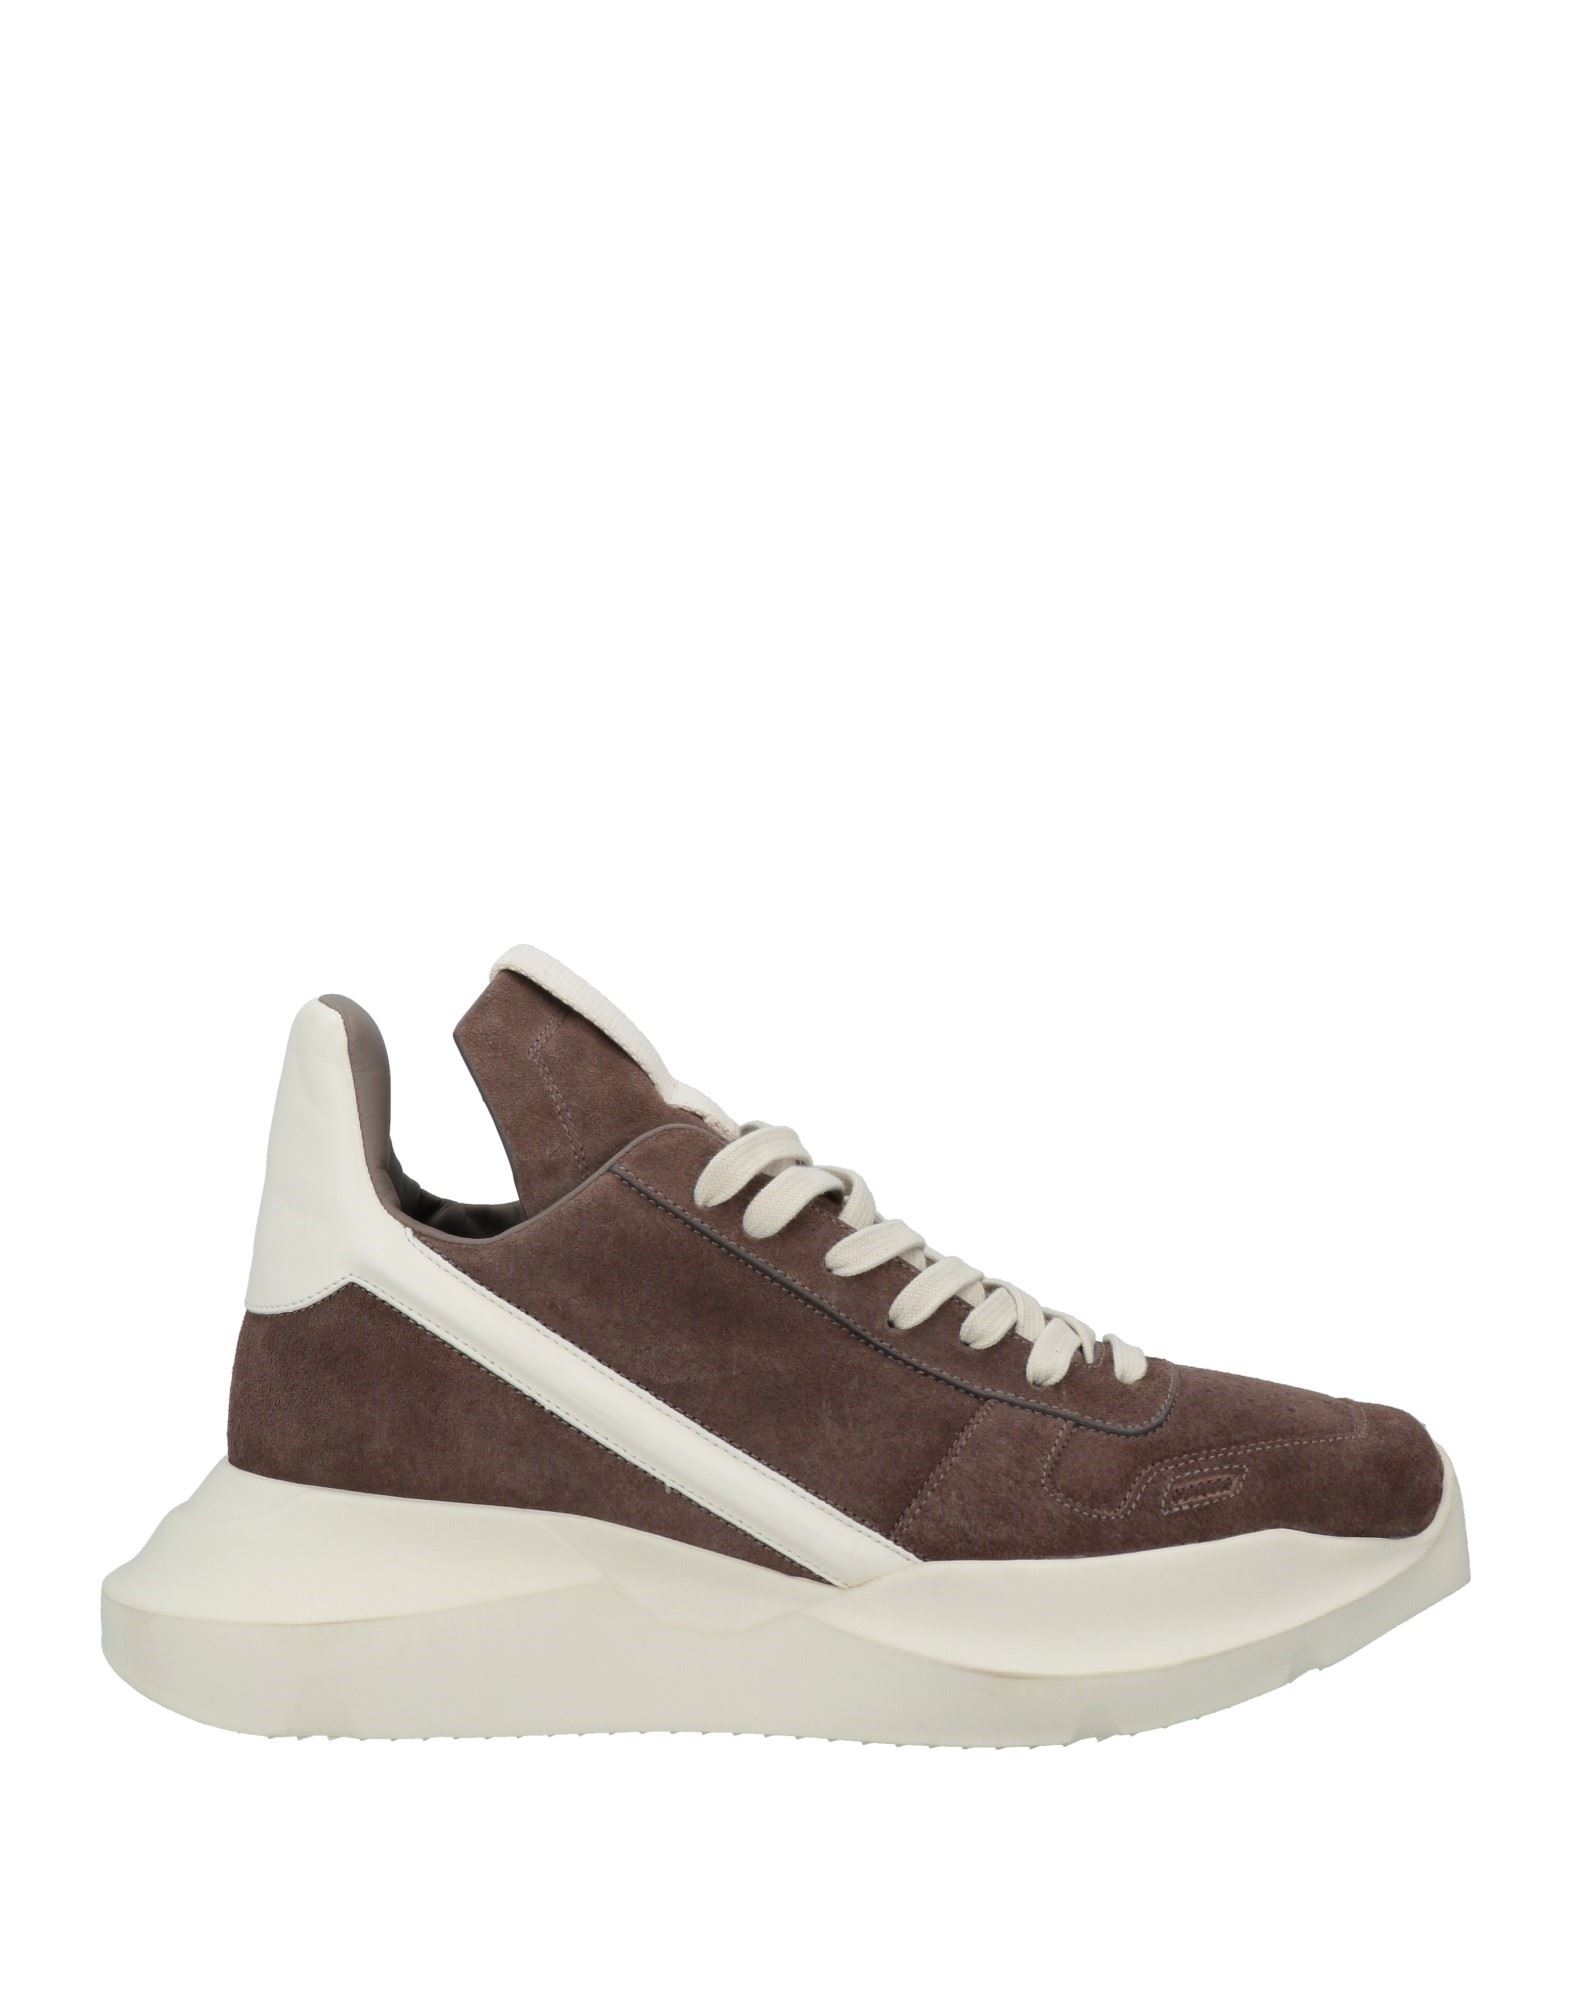 Rick Owens Man Sneakers Brown Size 12 Soft Leather